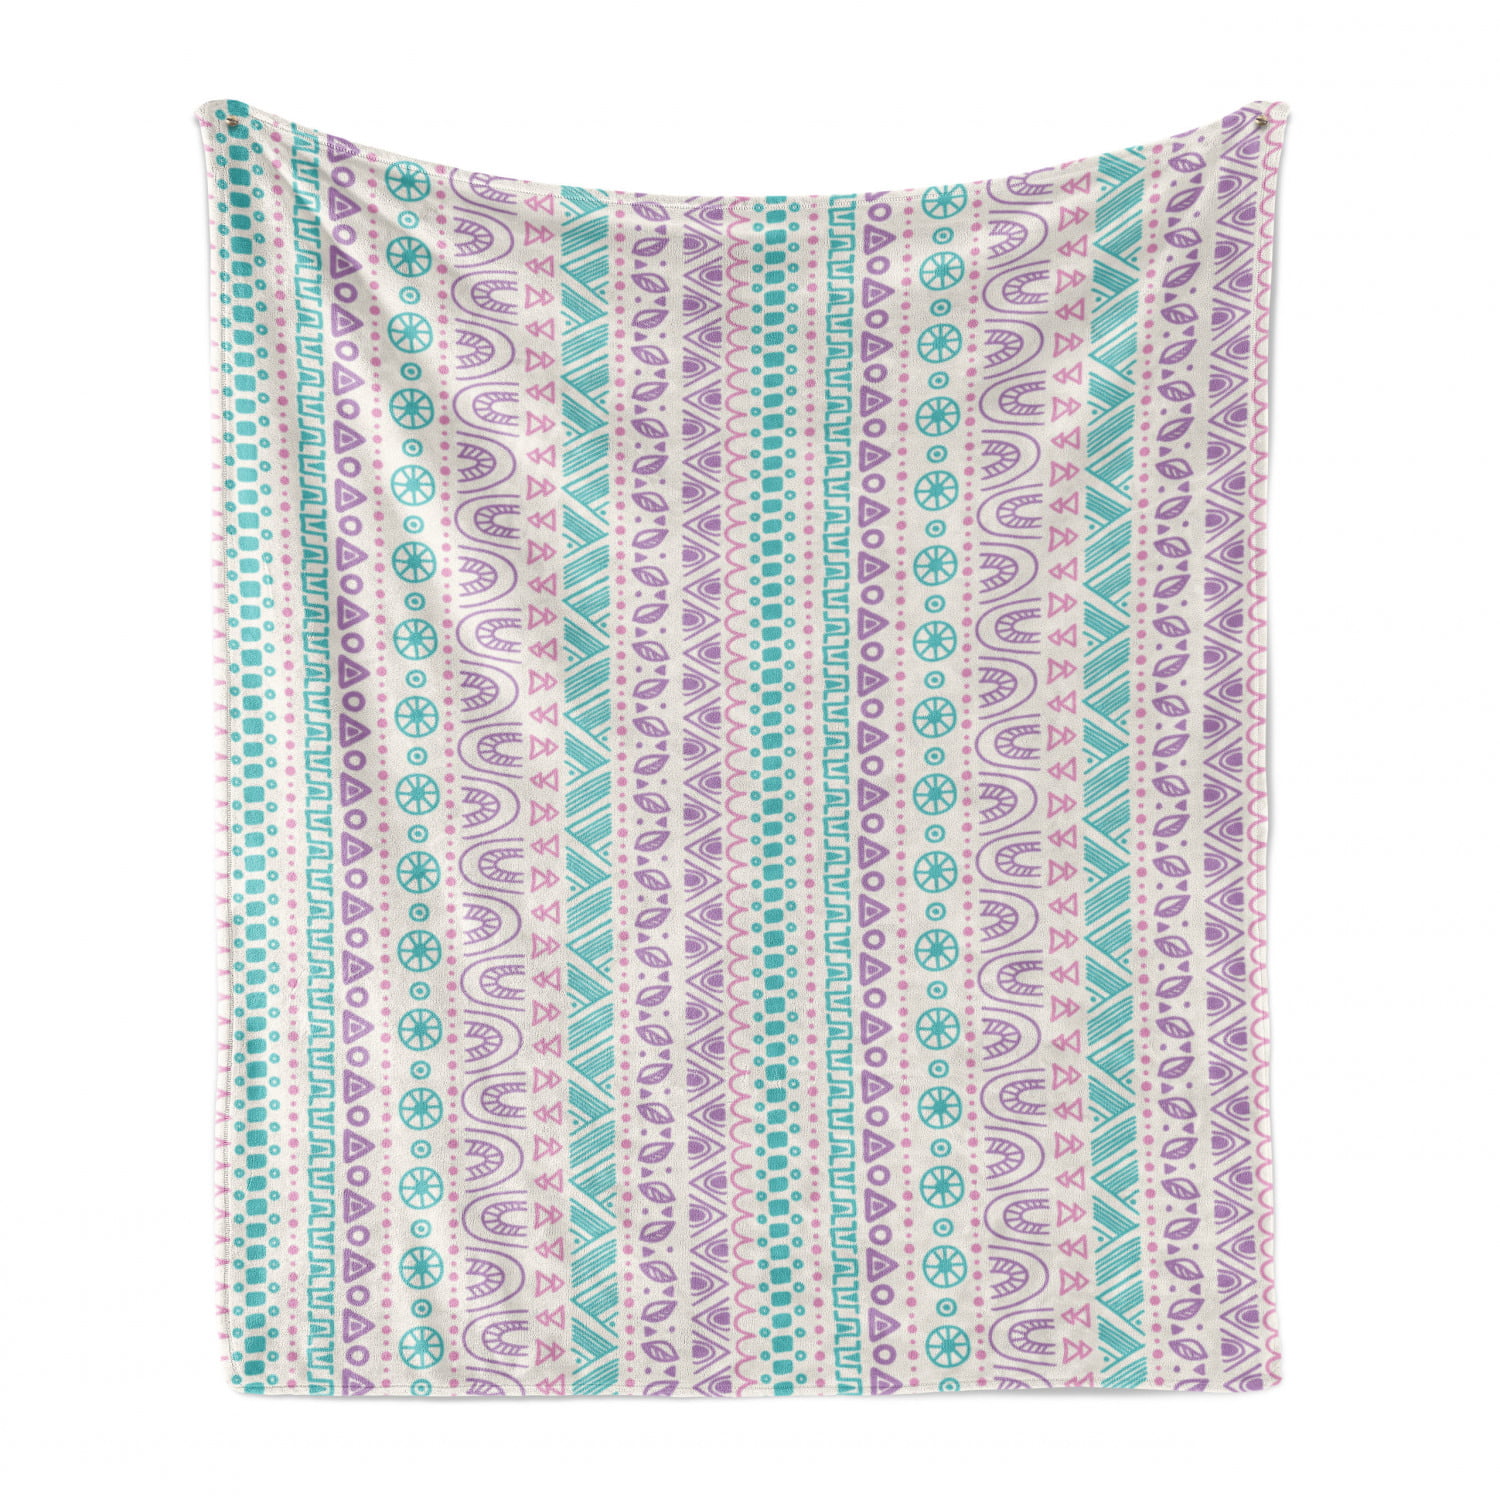 Flannel Fleece Accent Piece Soft Couch Cover for Adults Lilac Turquoise Prehistoric Culture Geometric Cave Abstract National Print 50 x 70 Ambesonne Striped Throw Blanket